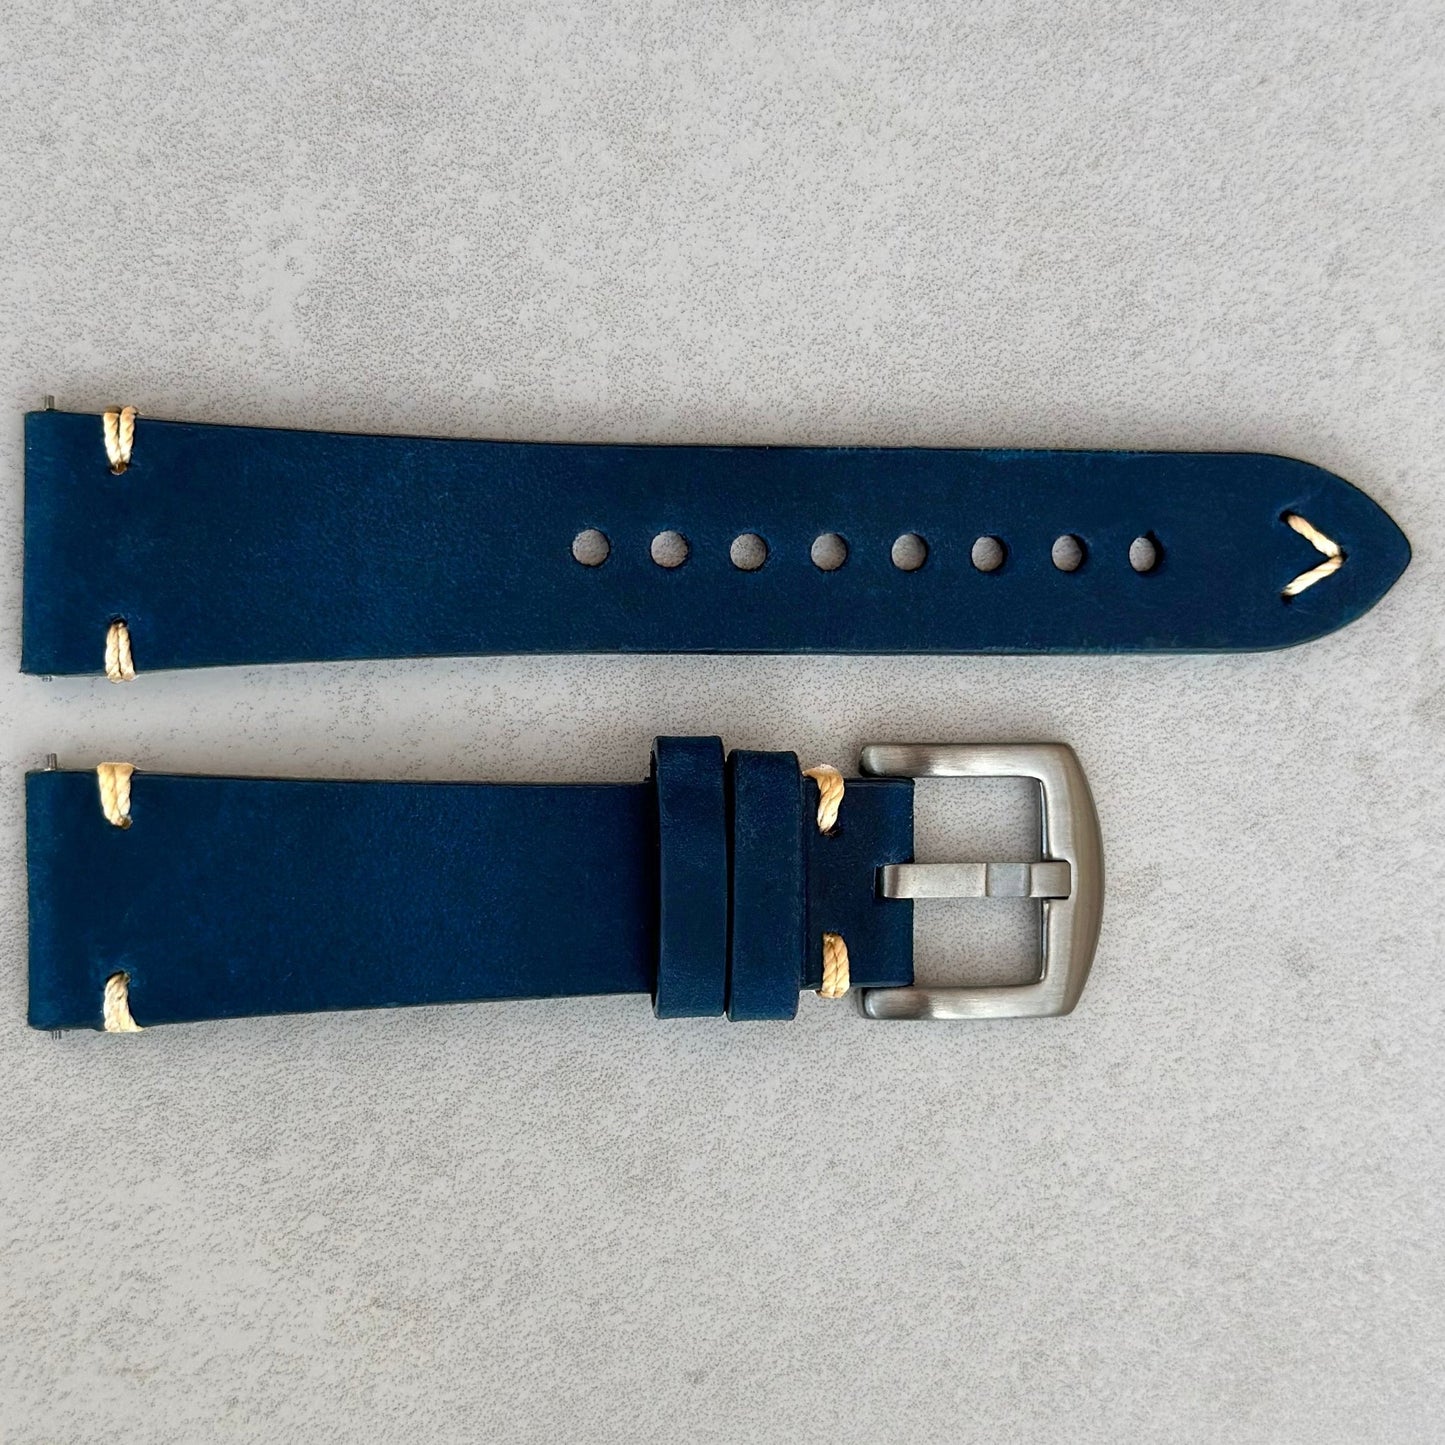 Madrid midnight blue full grain leather watch strap. Fitted with a brushed 316L stainless steel buckle. Watch And Strap